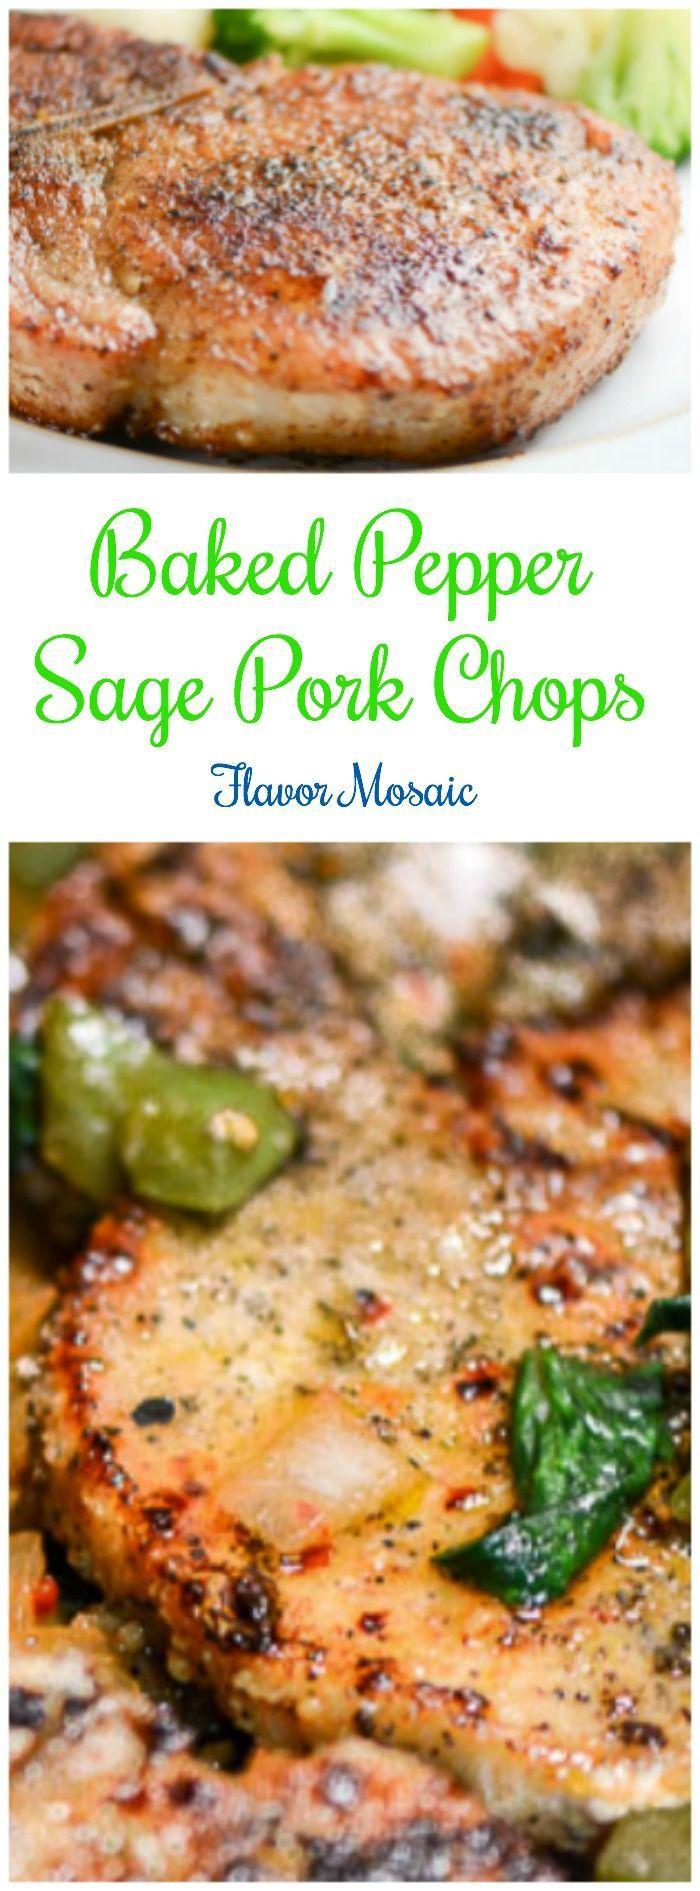 Are Pork Chops Healthy For You
 Best 25 Healthy pork chops ideas on Pinterest